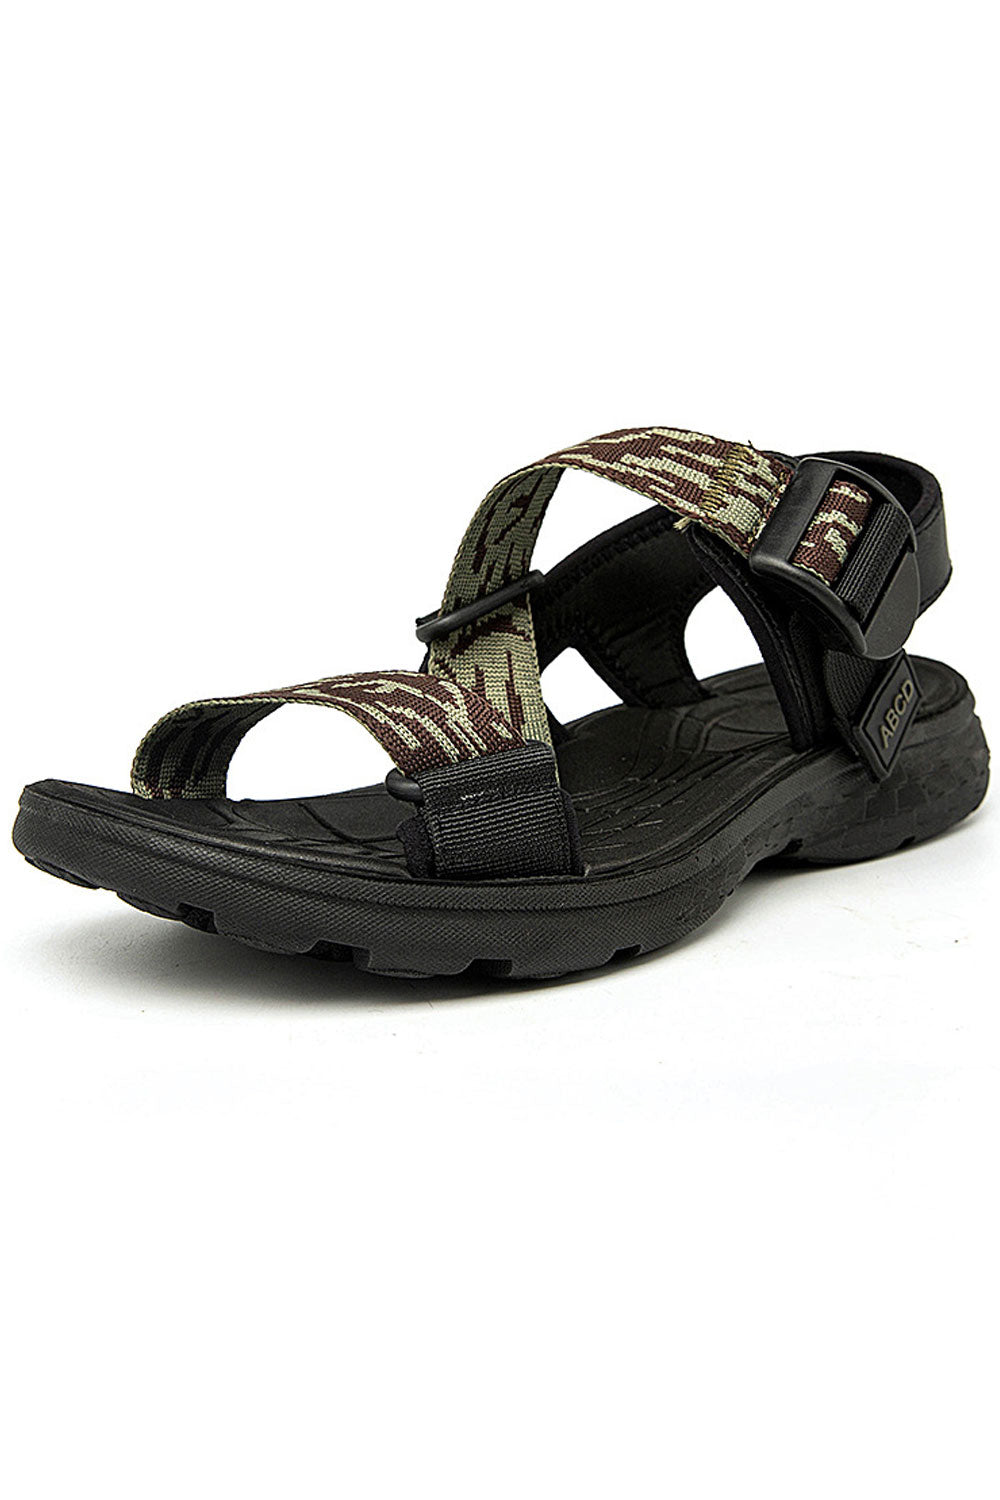 Men Fabulous Camouflage Pattern Flat Rubber Soled Easy Buckle Closure Lightweight Casual Sandal - MSD105636